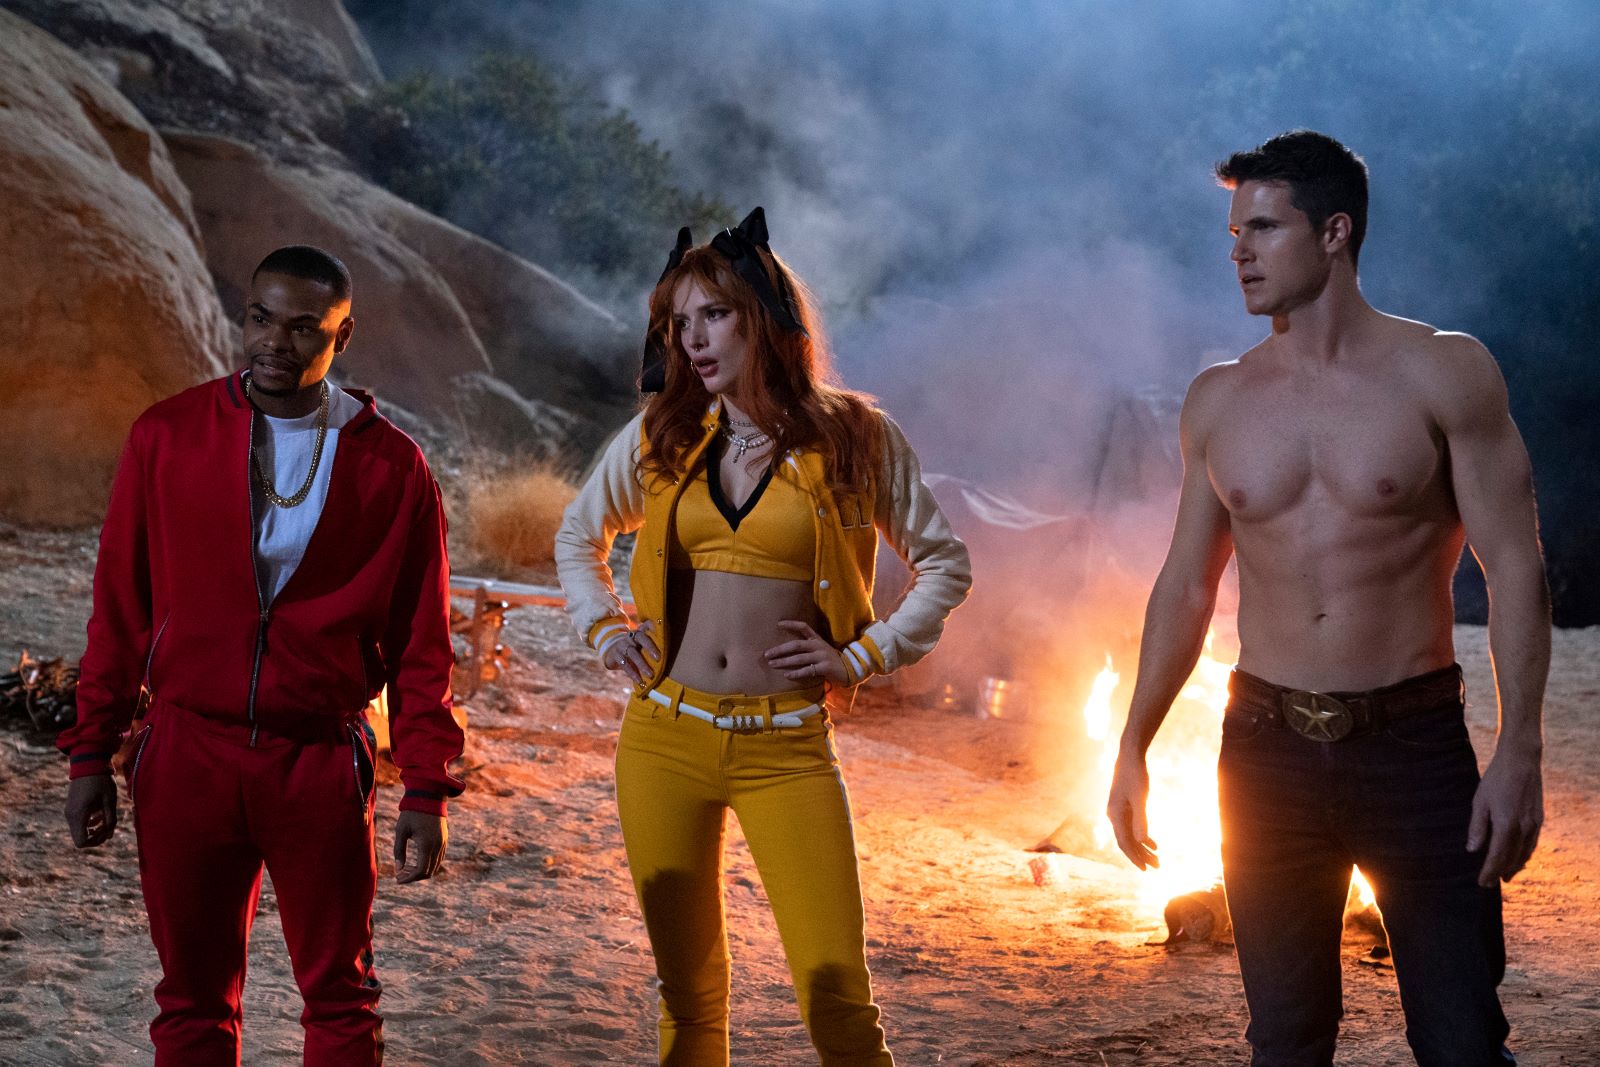 ‘The Babysitter: Killer Queen’ (L To R) Andrew Bachelor, Bella Thorne, and Robbie Amell